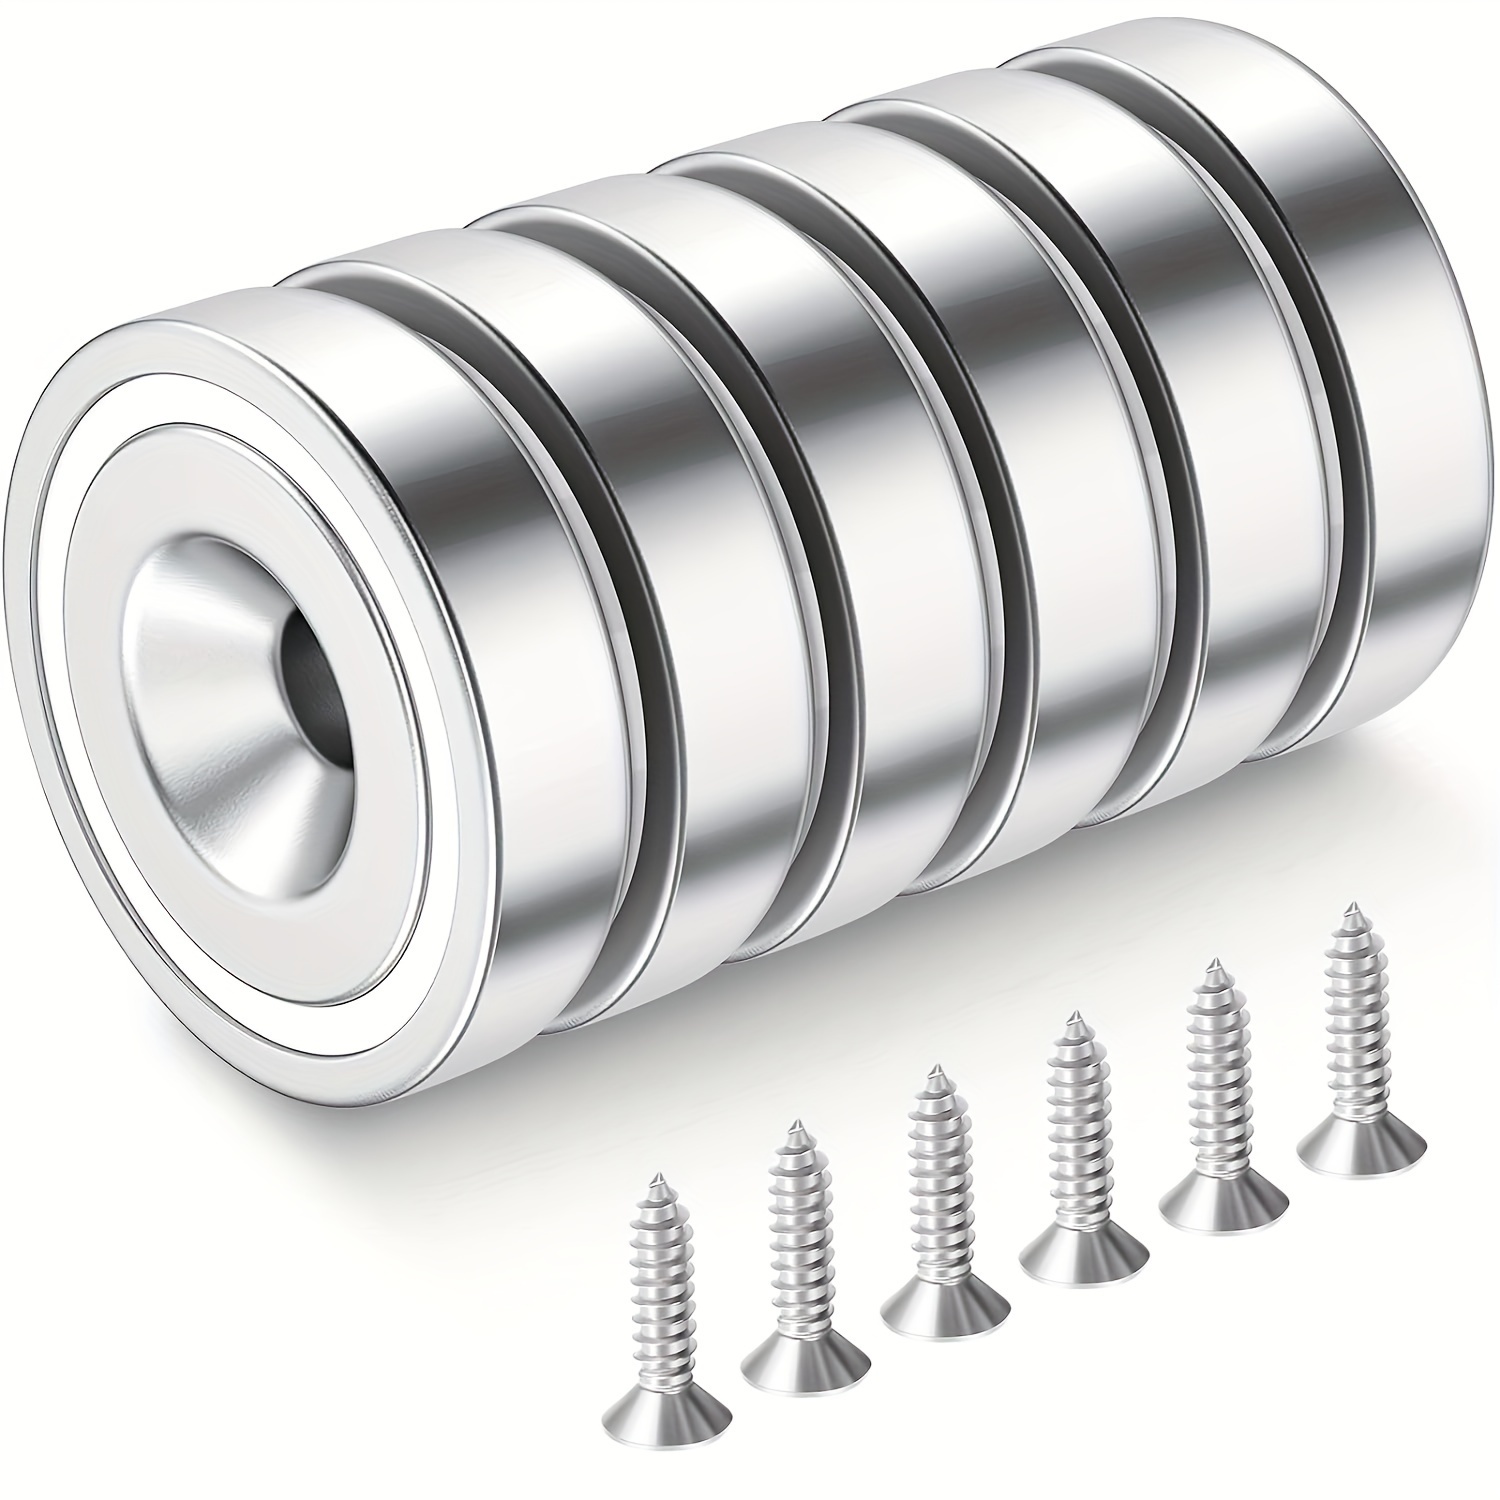 

6pcs, 20x7mm Neodymium Magnets With Hole, Small Industrial Rare Earth Magnets, 22lb/10kg Holding Force, With Screws